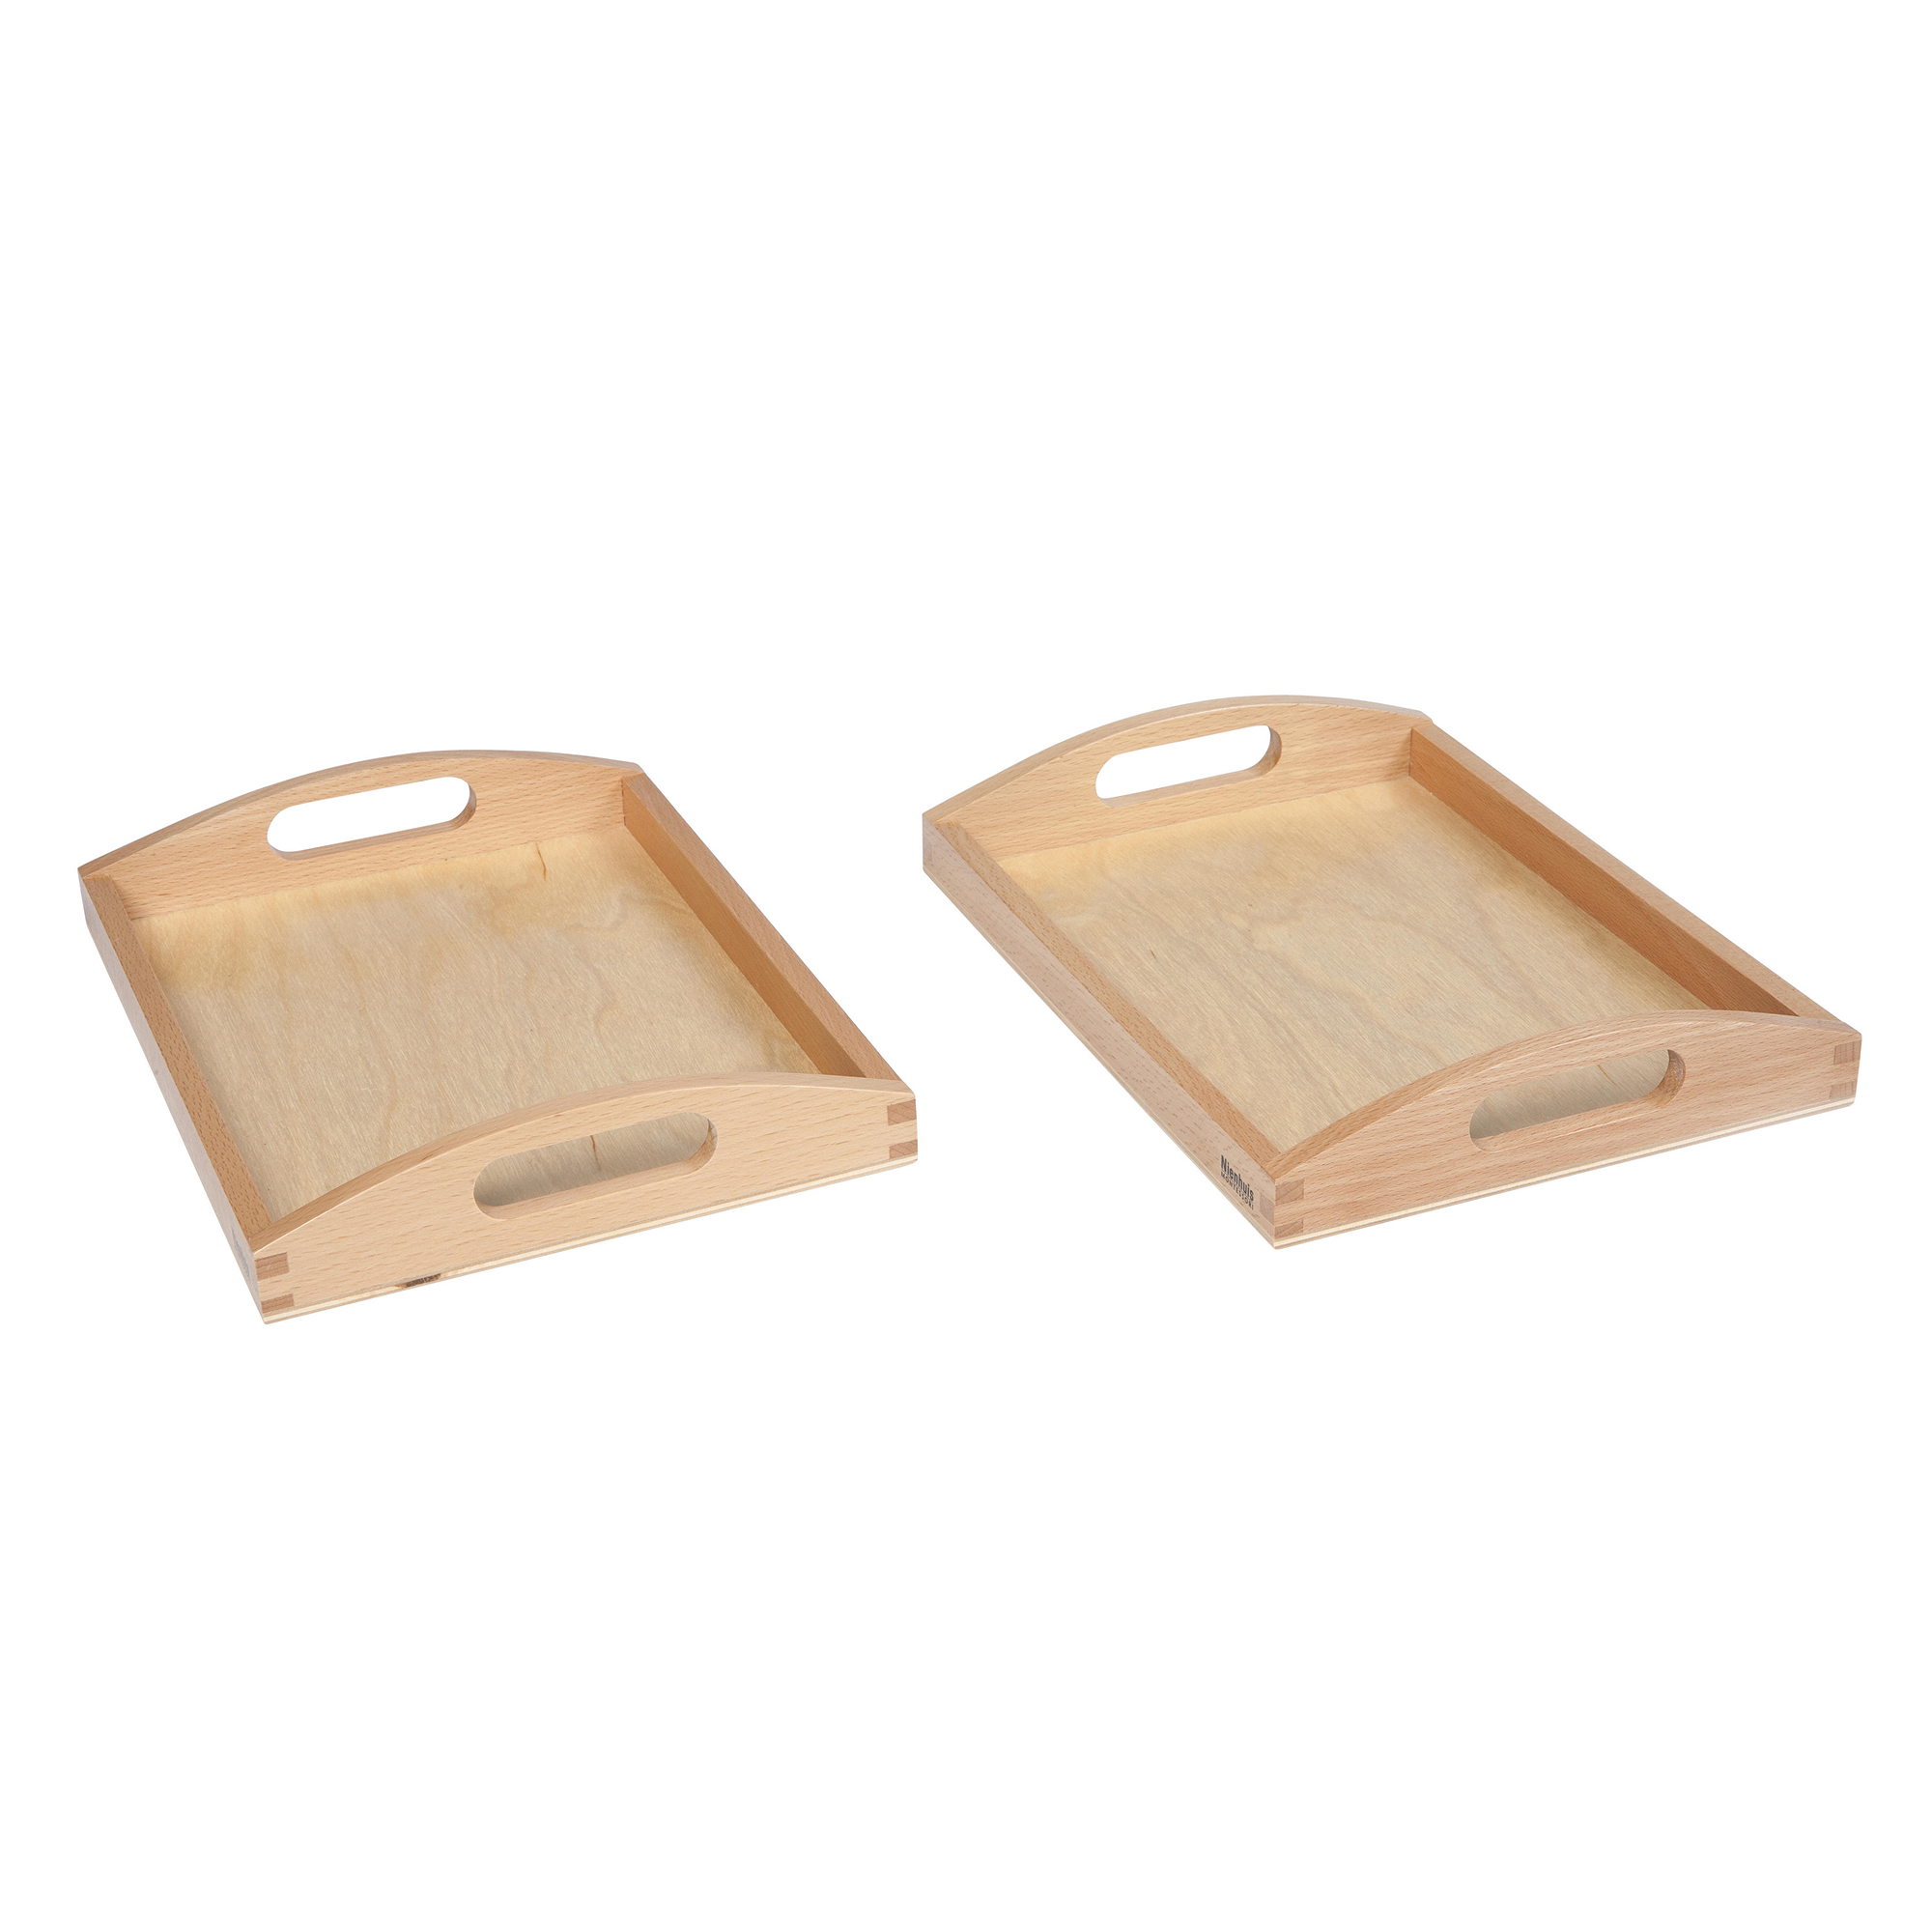 Wooden Tray Small Set Of 2